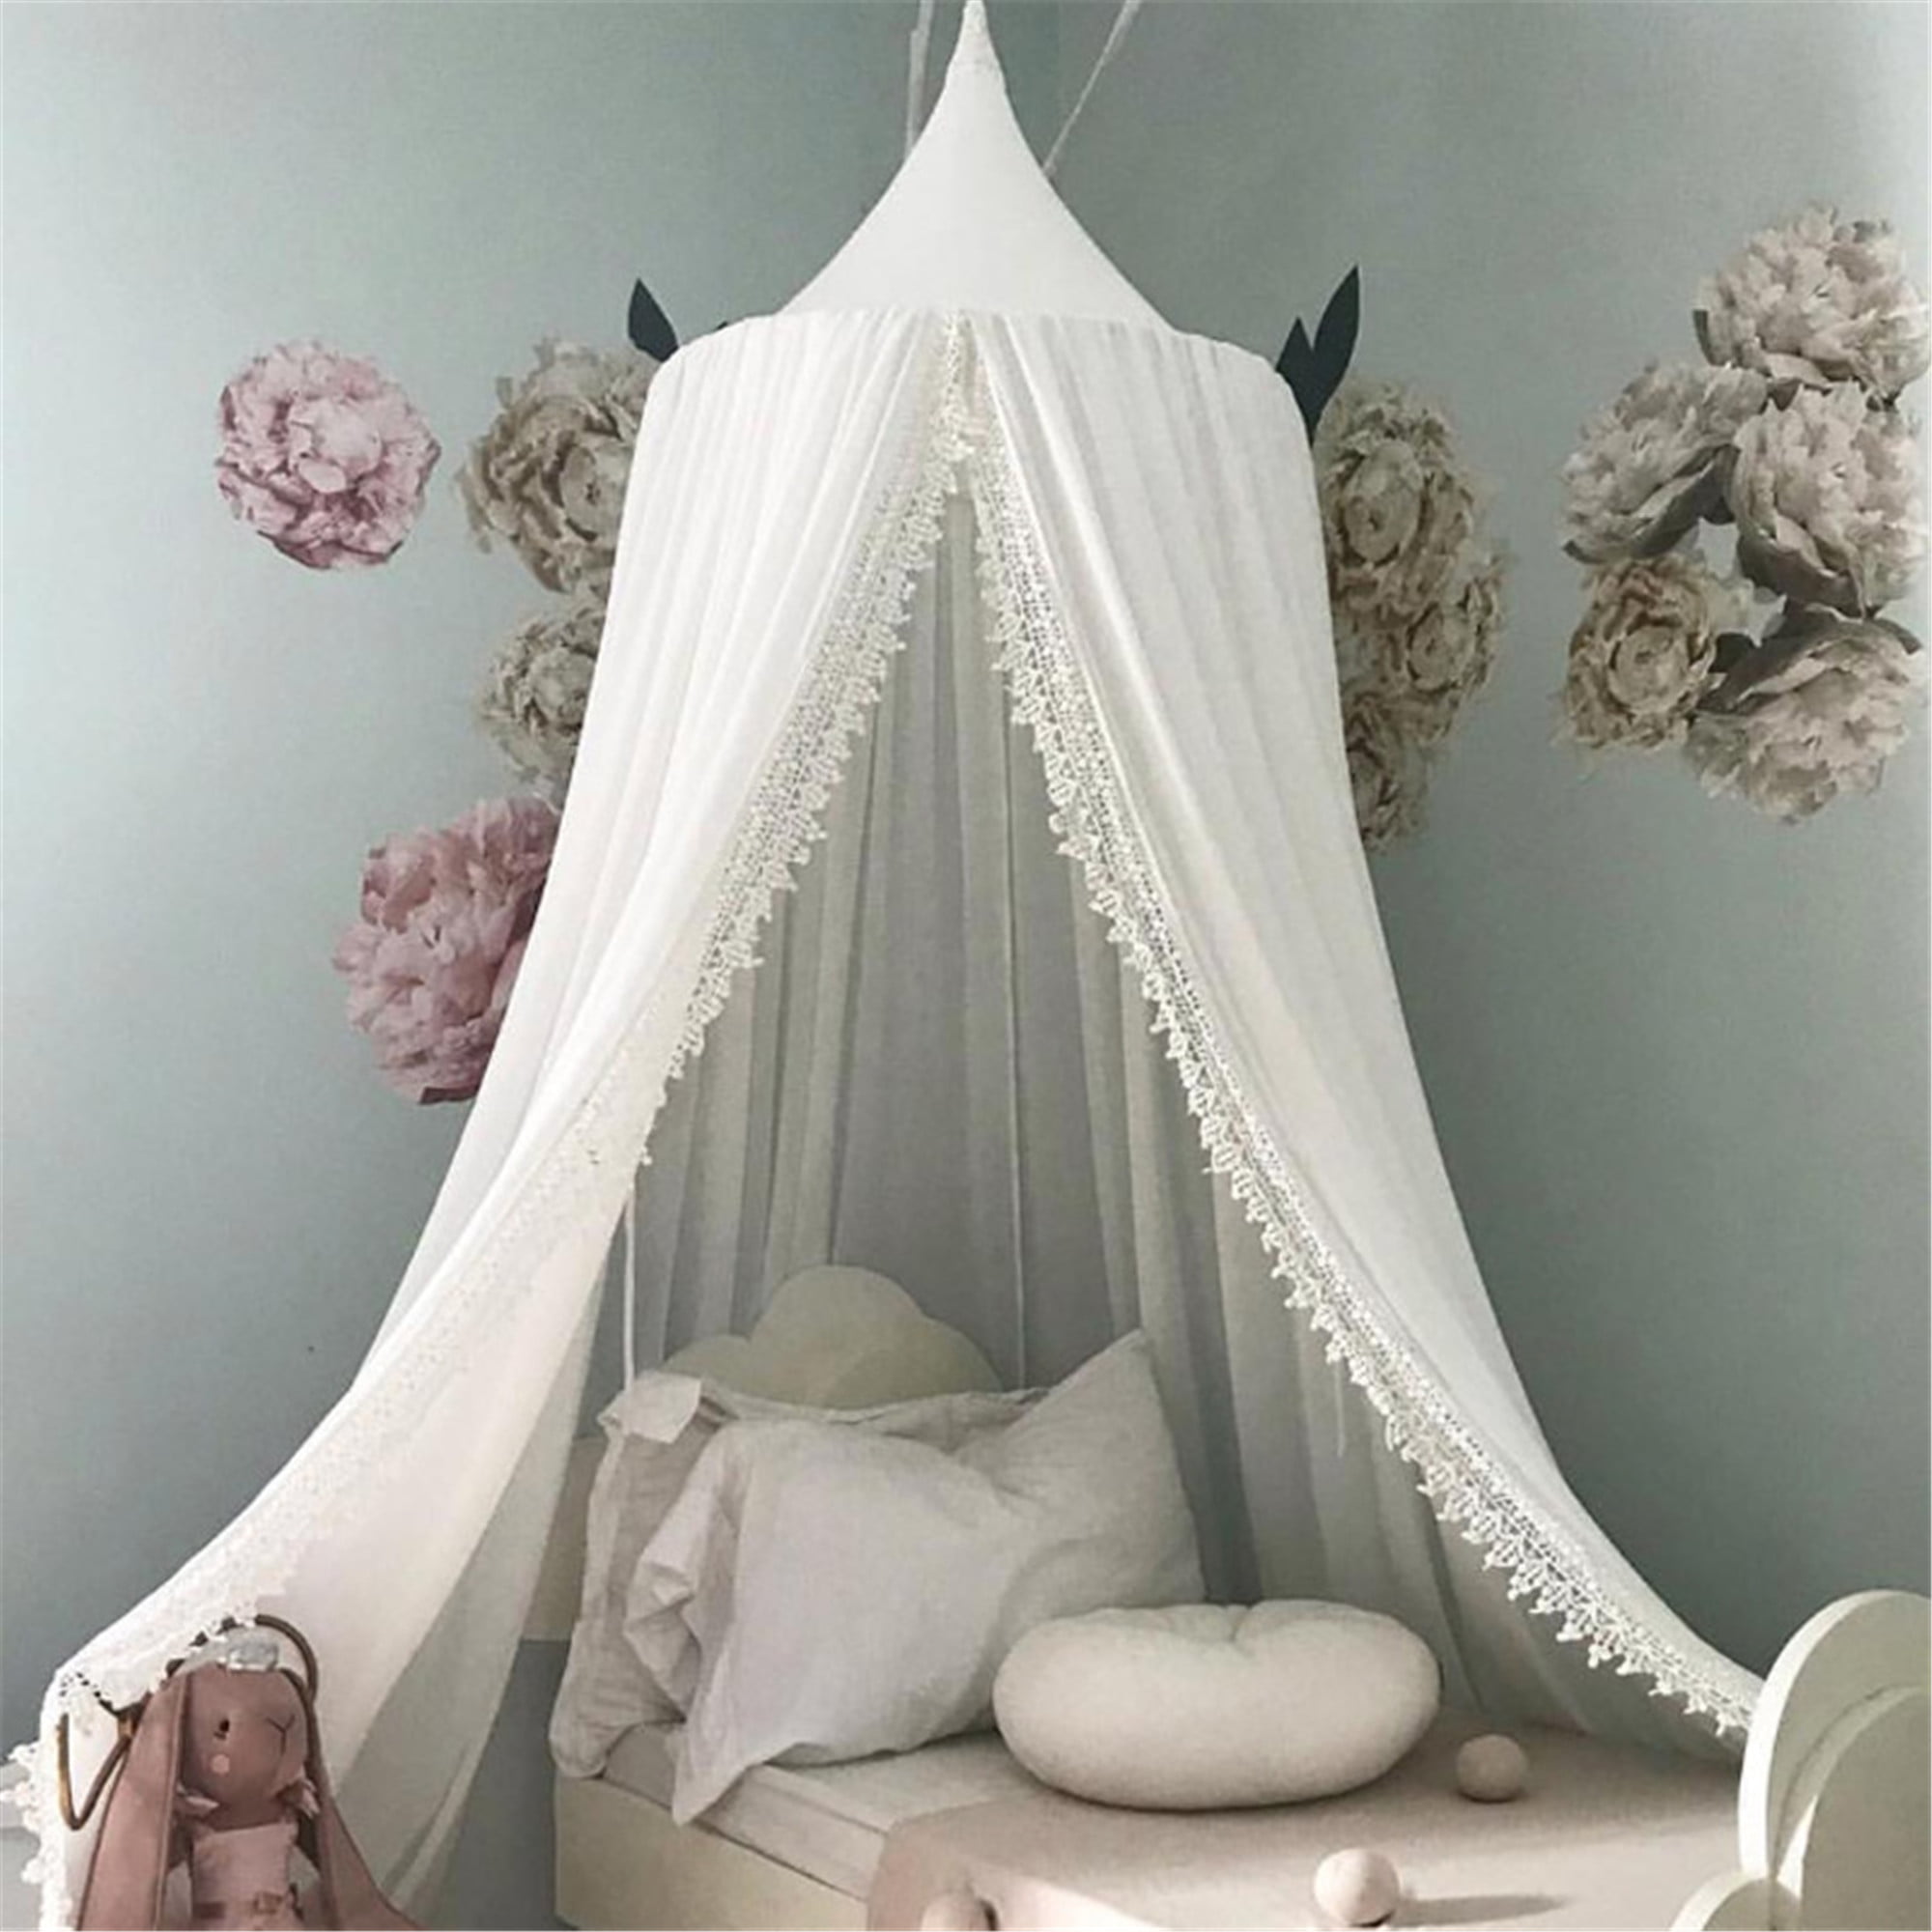 Nordic Style Hanging Dome Play Tent Bed Curtain Mosquito Net Children Room Decor 